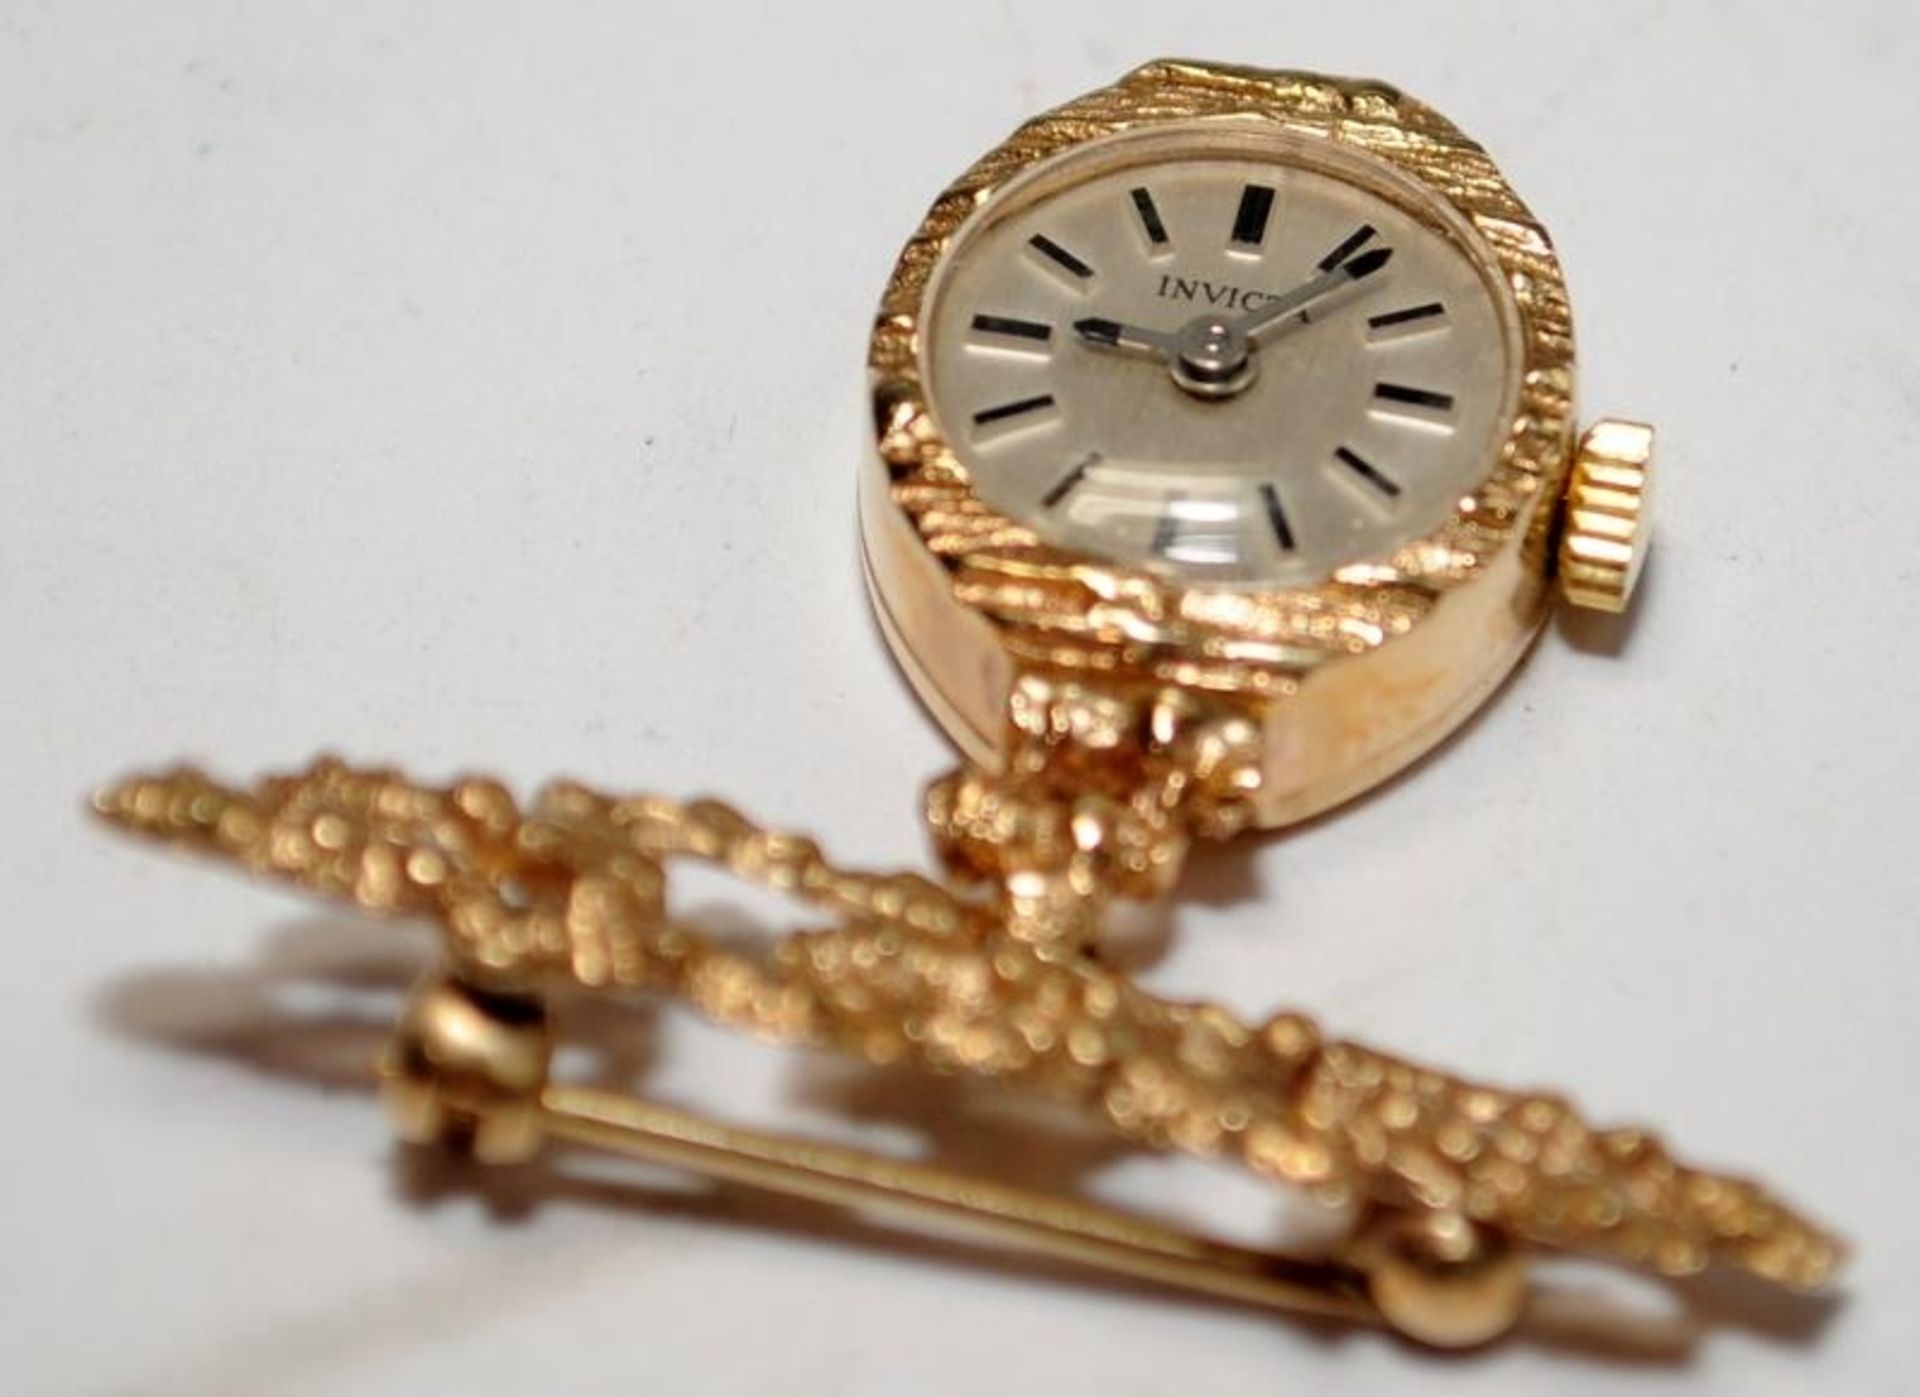 9ct gold brooch watch by Invicta. Watch winds and runs - Image 2 of 4